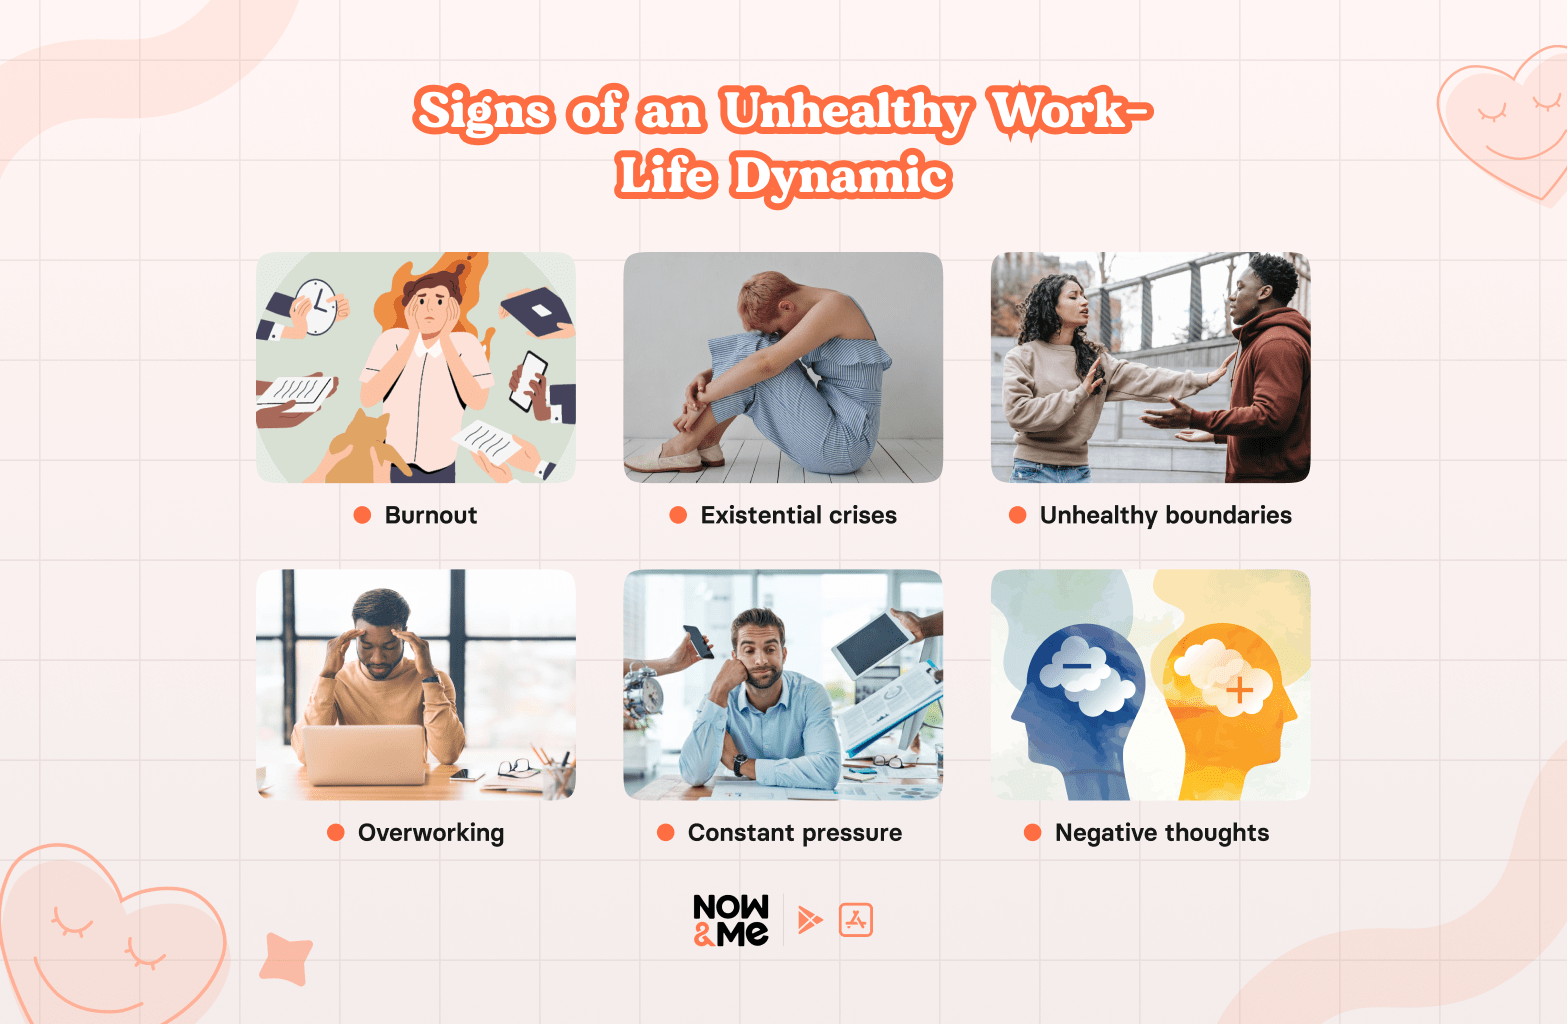 Signs of an Unhealthy Work Life Dynamic